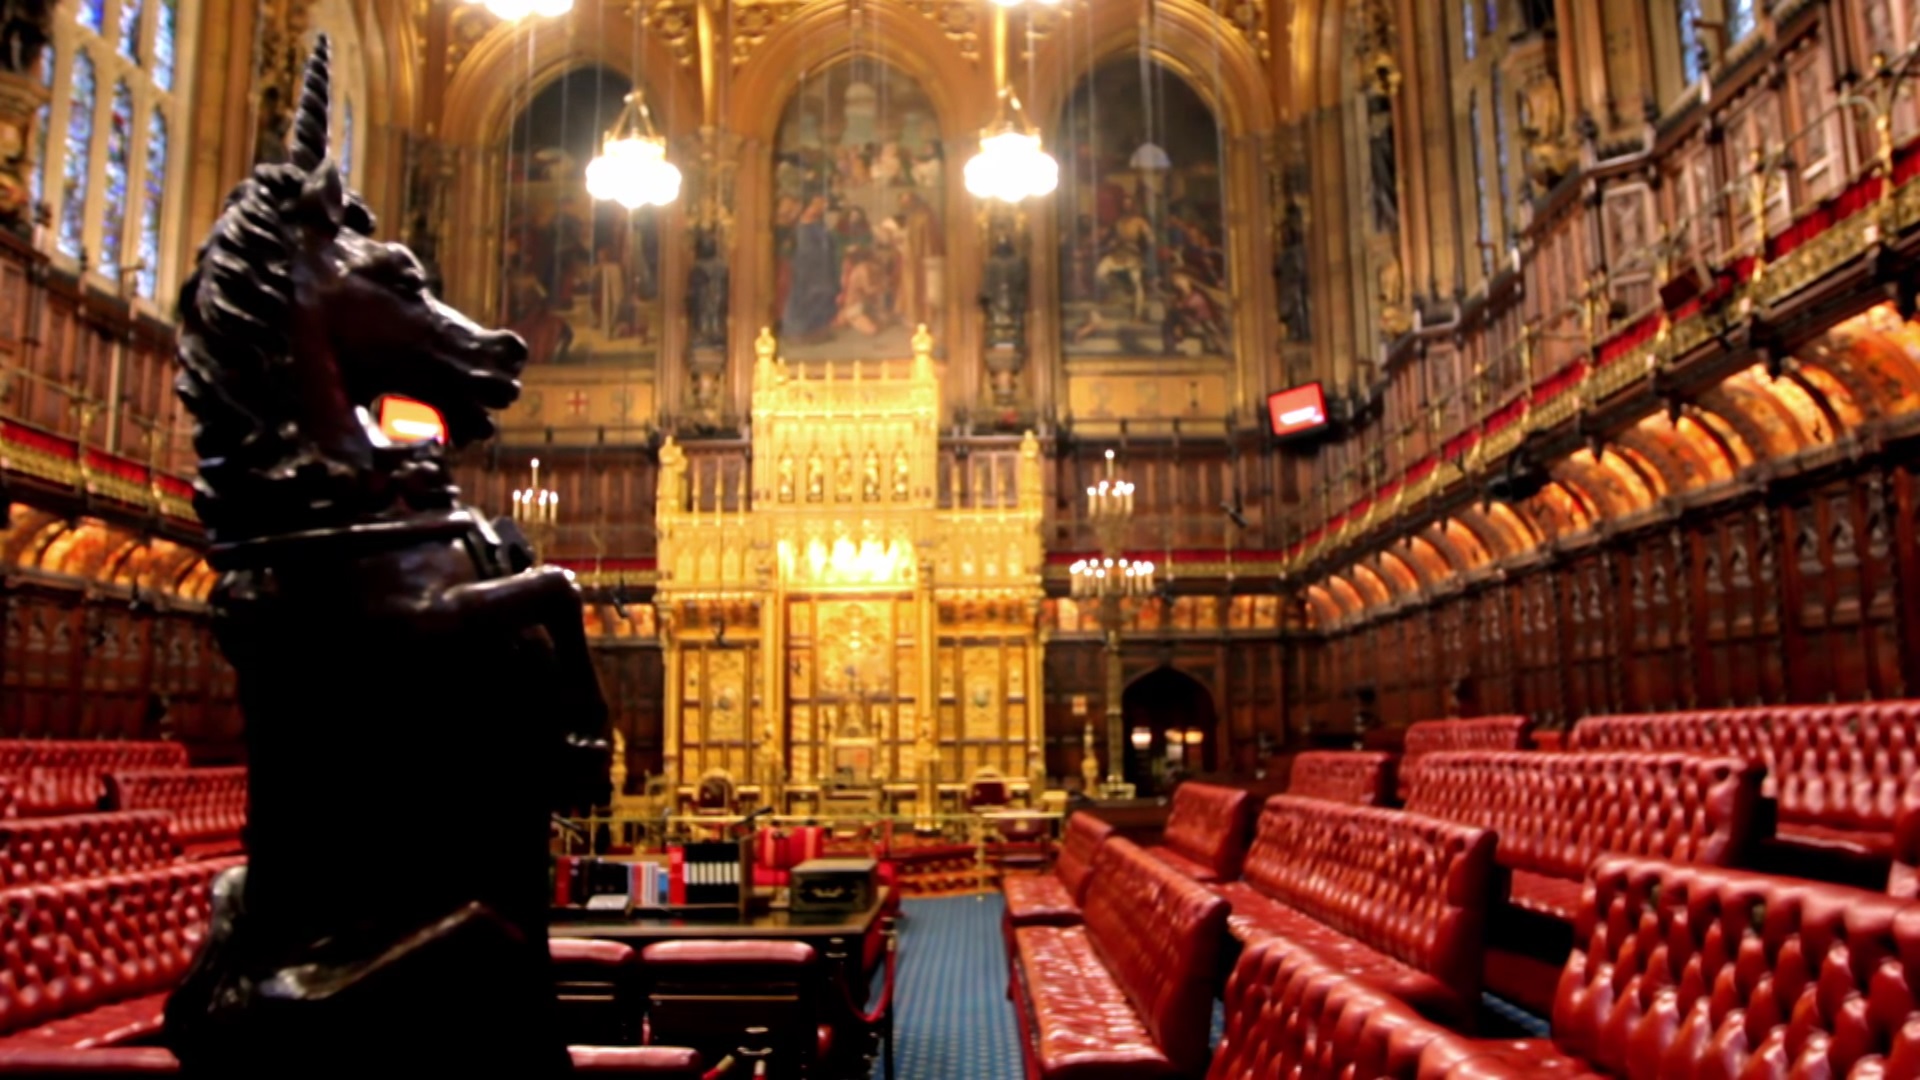 REFORMING THE HOUSE of LORDS